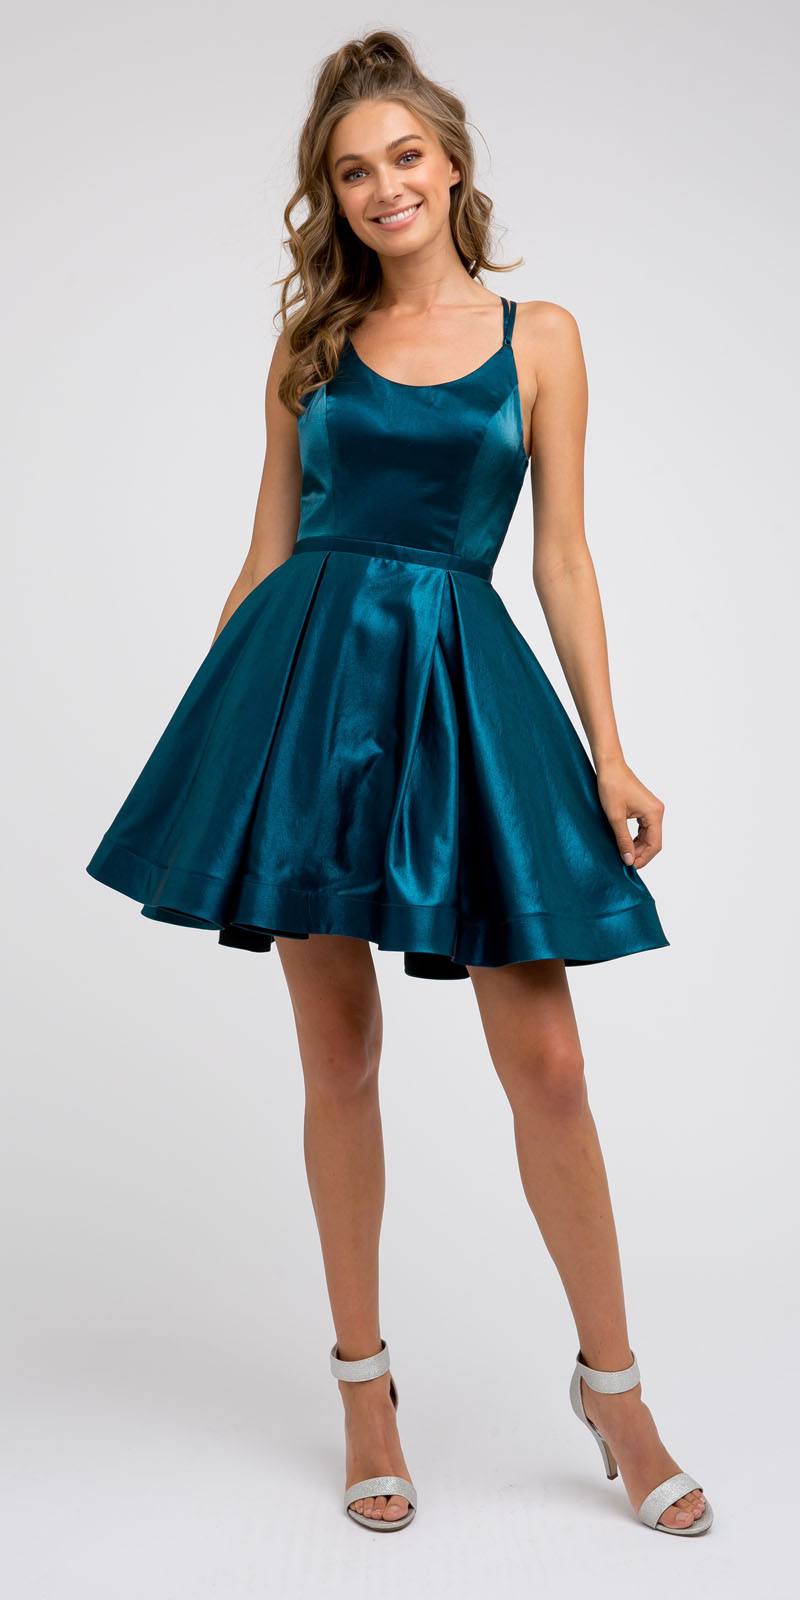 Caged-Back Homecoming Short Dress Teal with Pockets